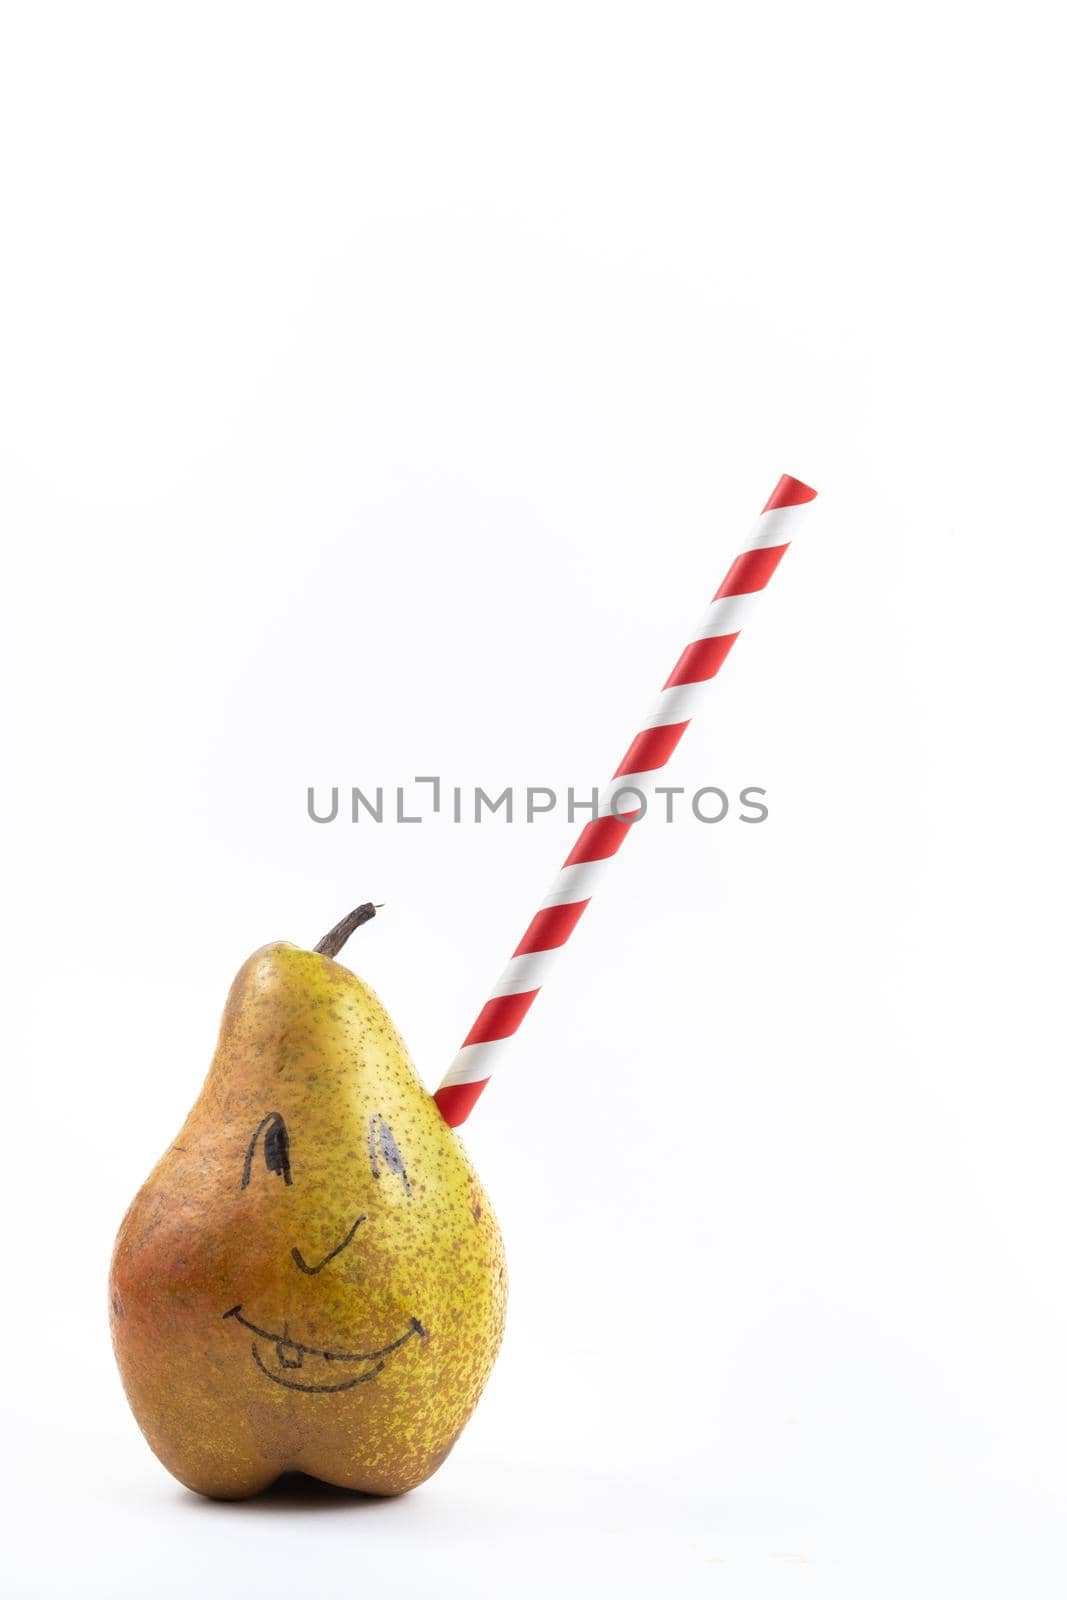 A large pear with a drinking tube sticking out of it on a white background.